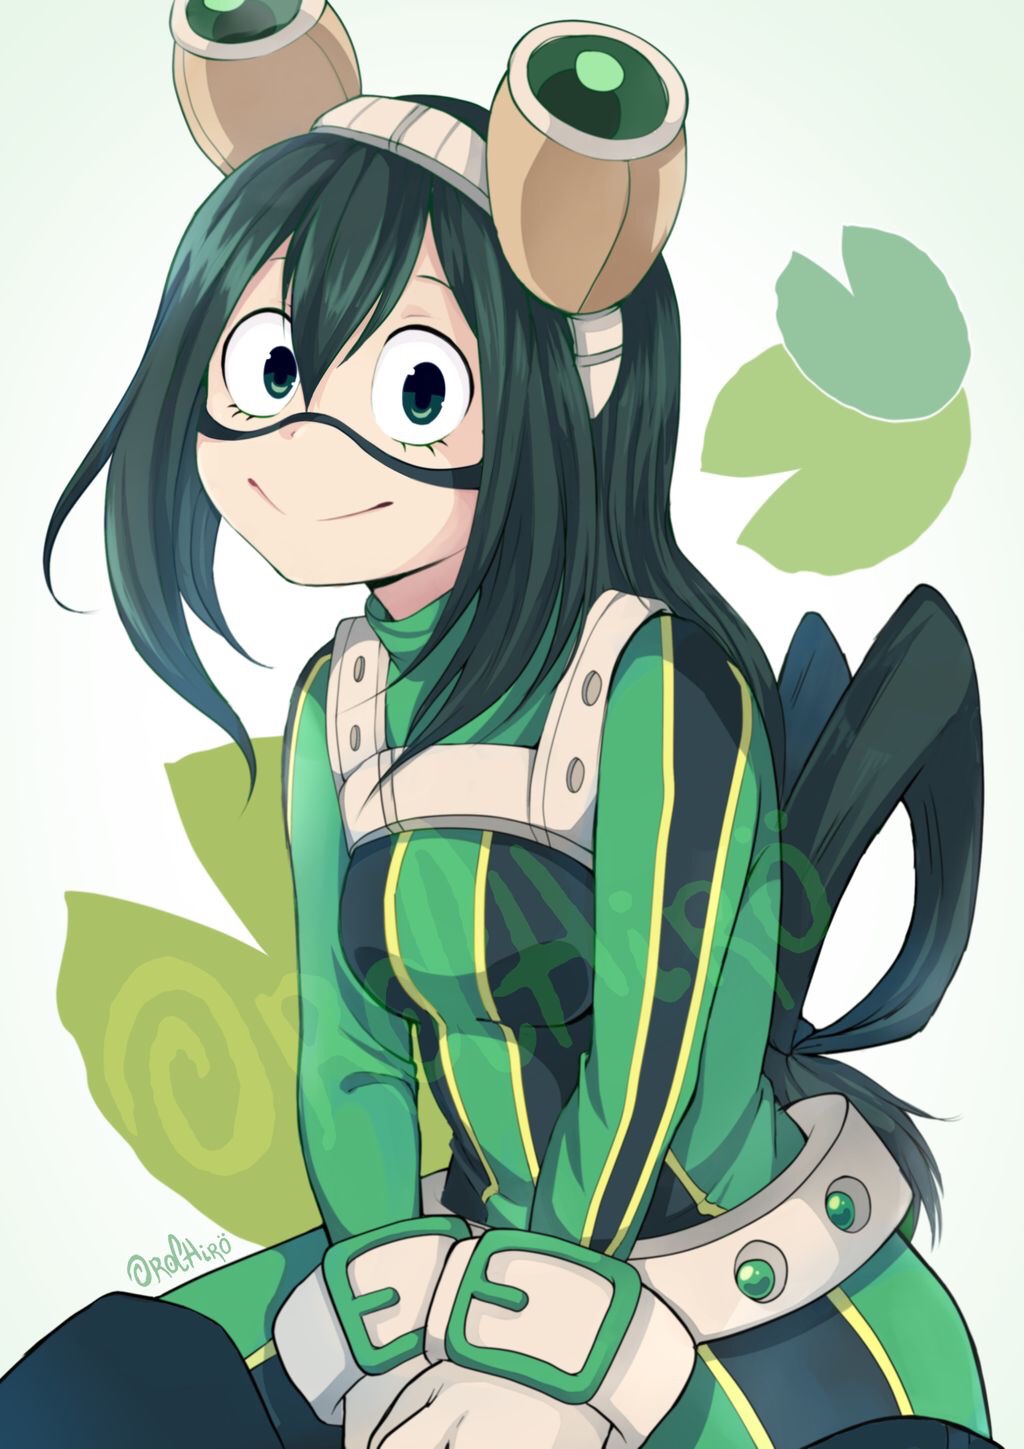 Your cute! *blushes* ~Froppy.